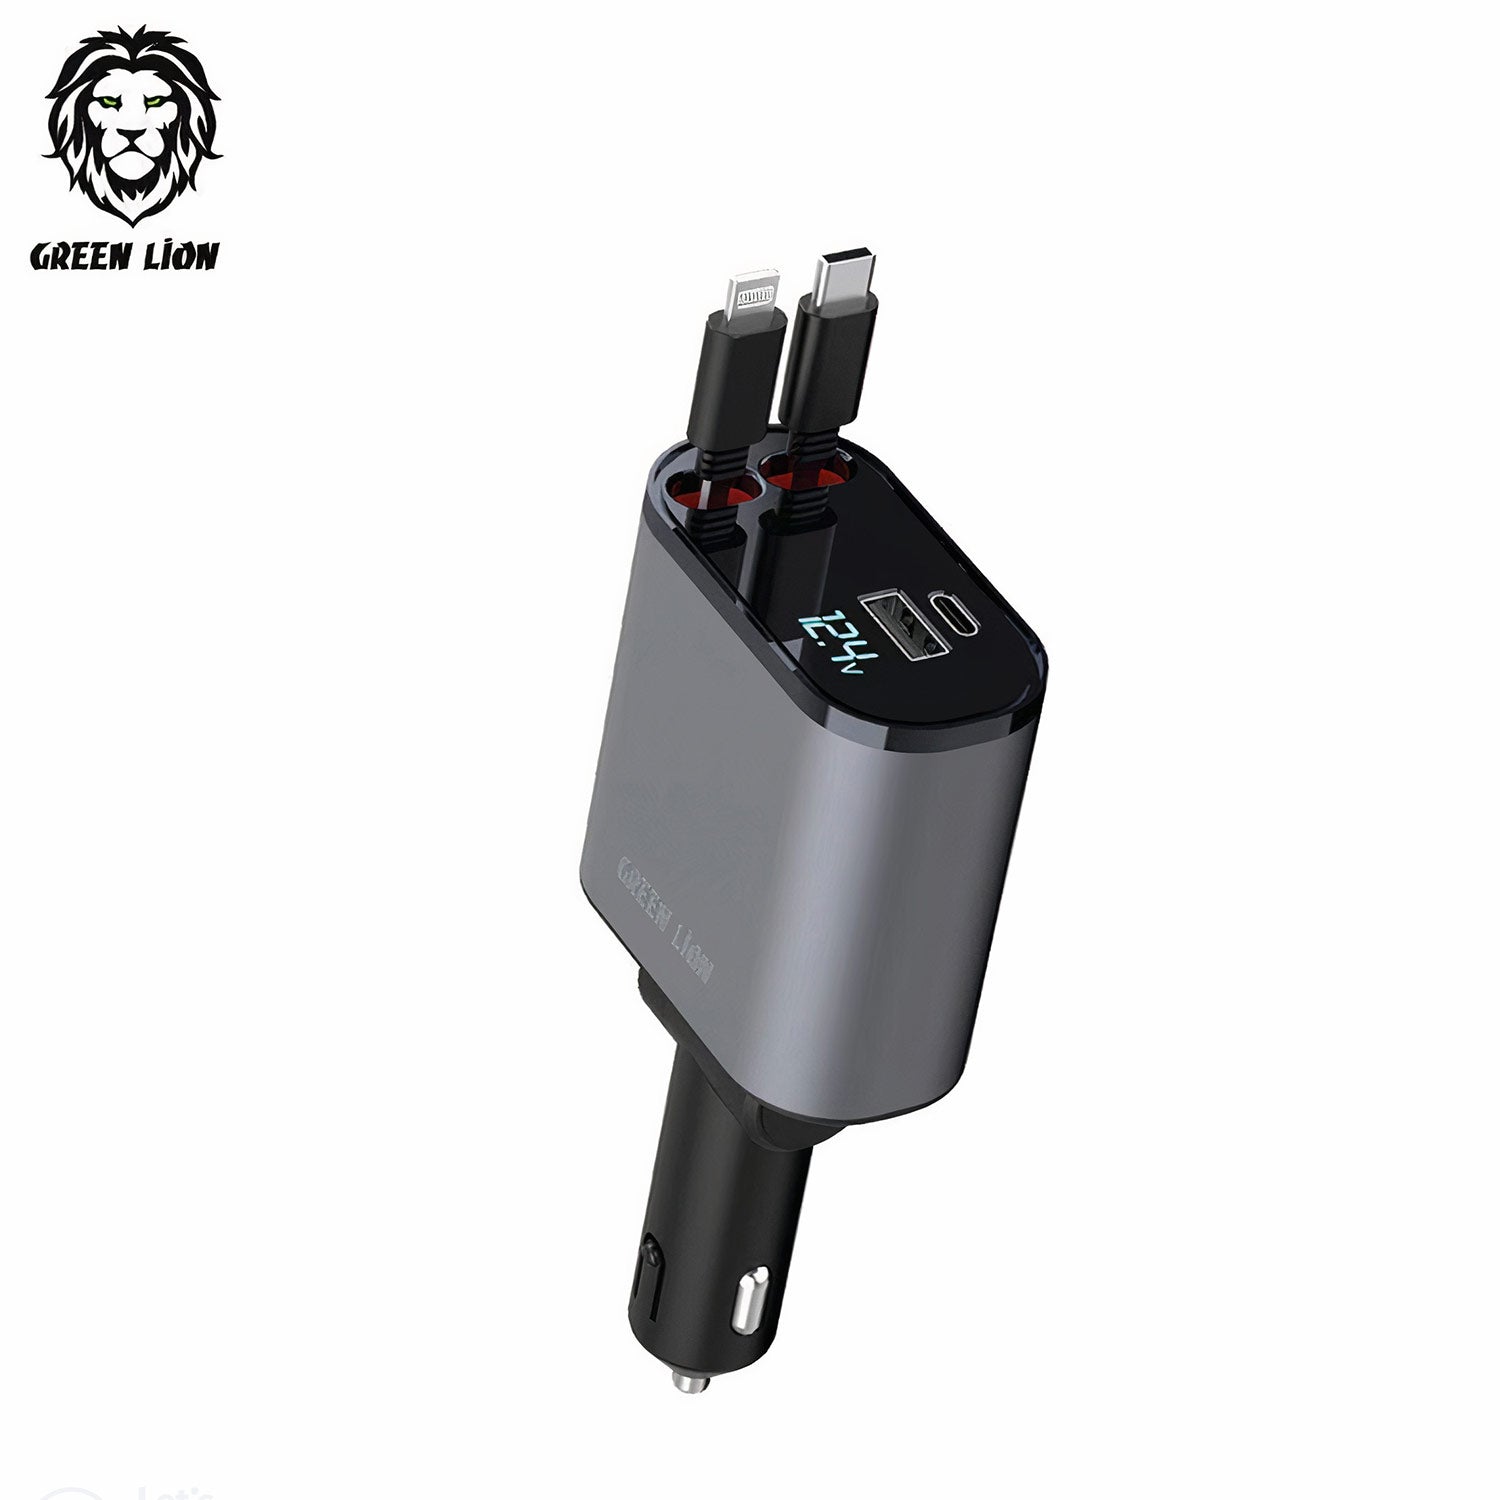 Green lion integrated car charger